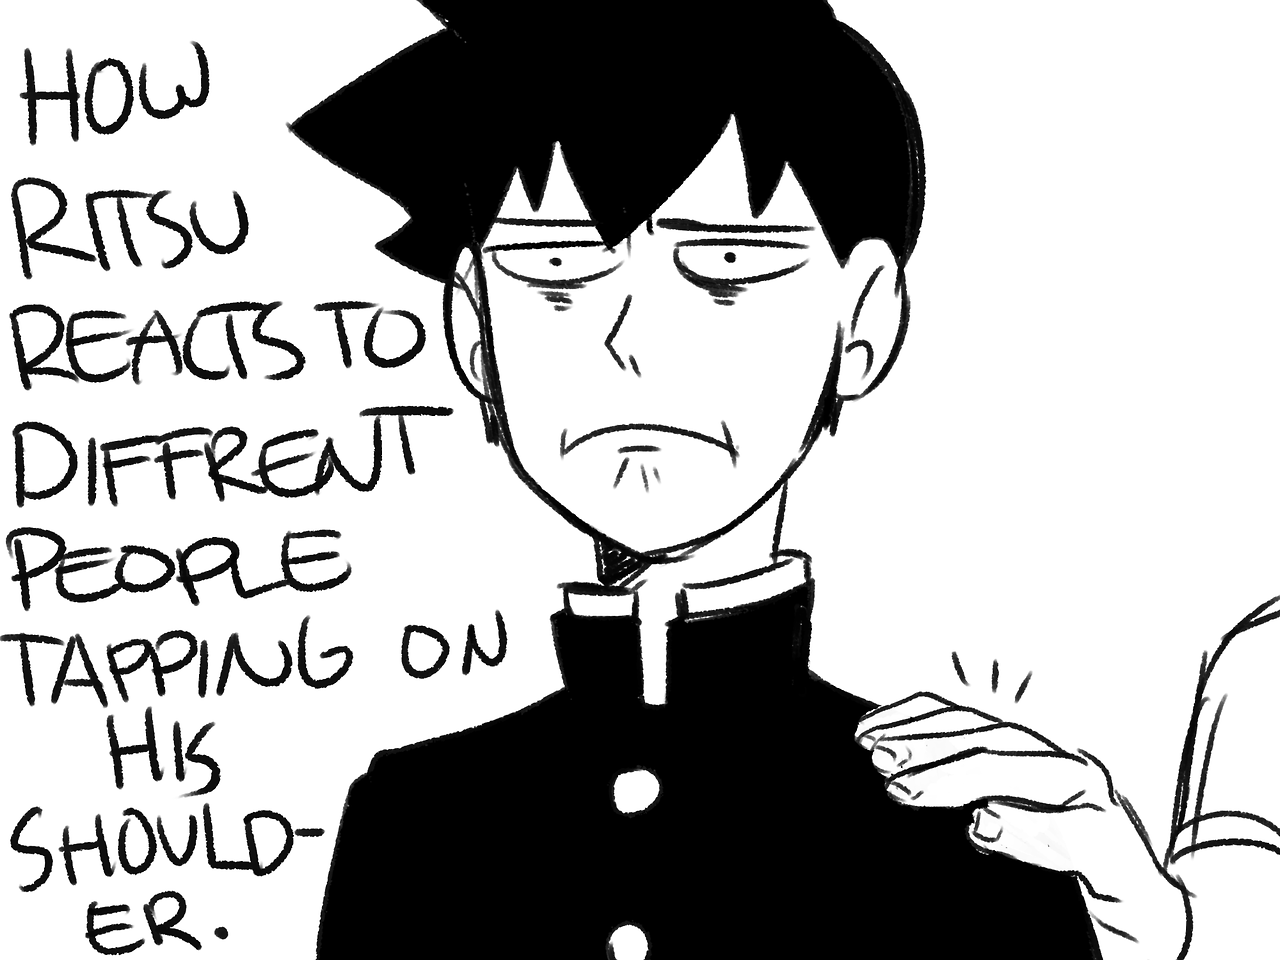 koomaart:  @ligs-is-a-turd and i were talking about how ritsu would react to others